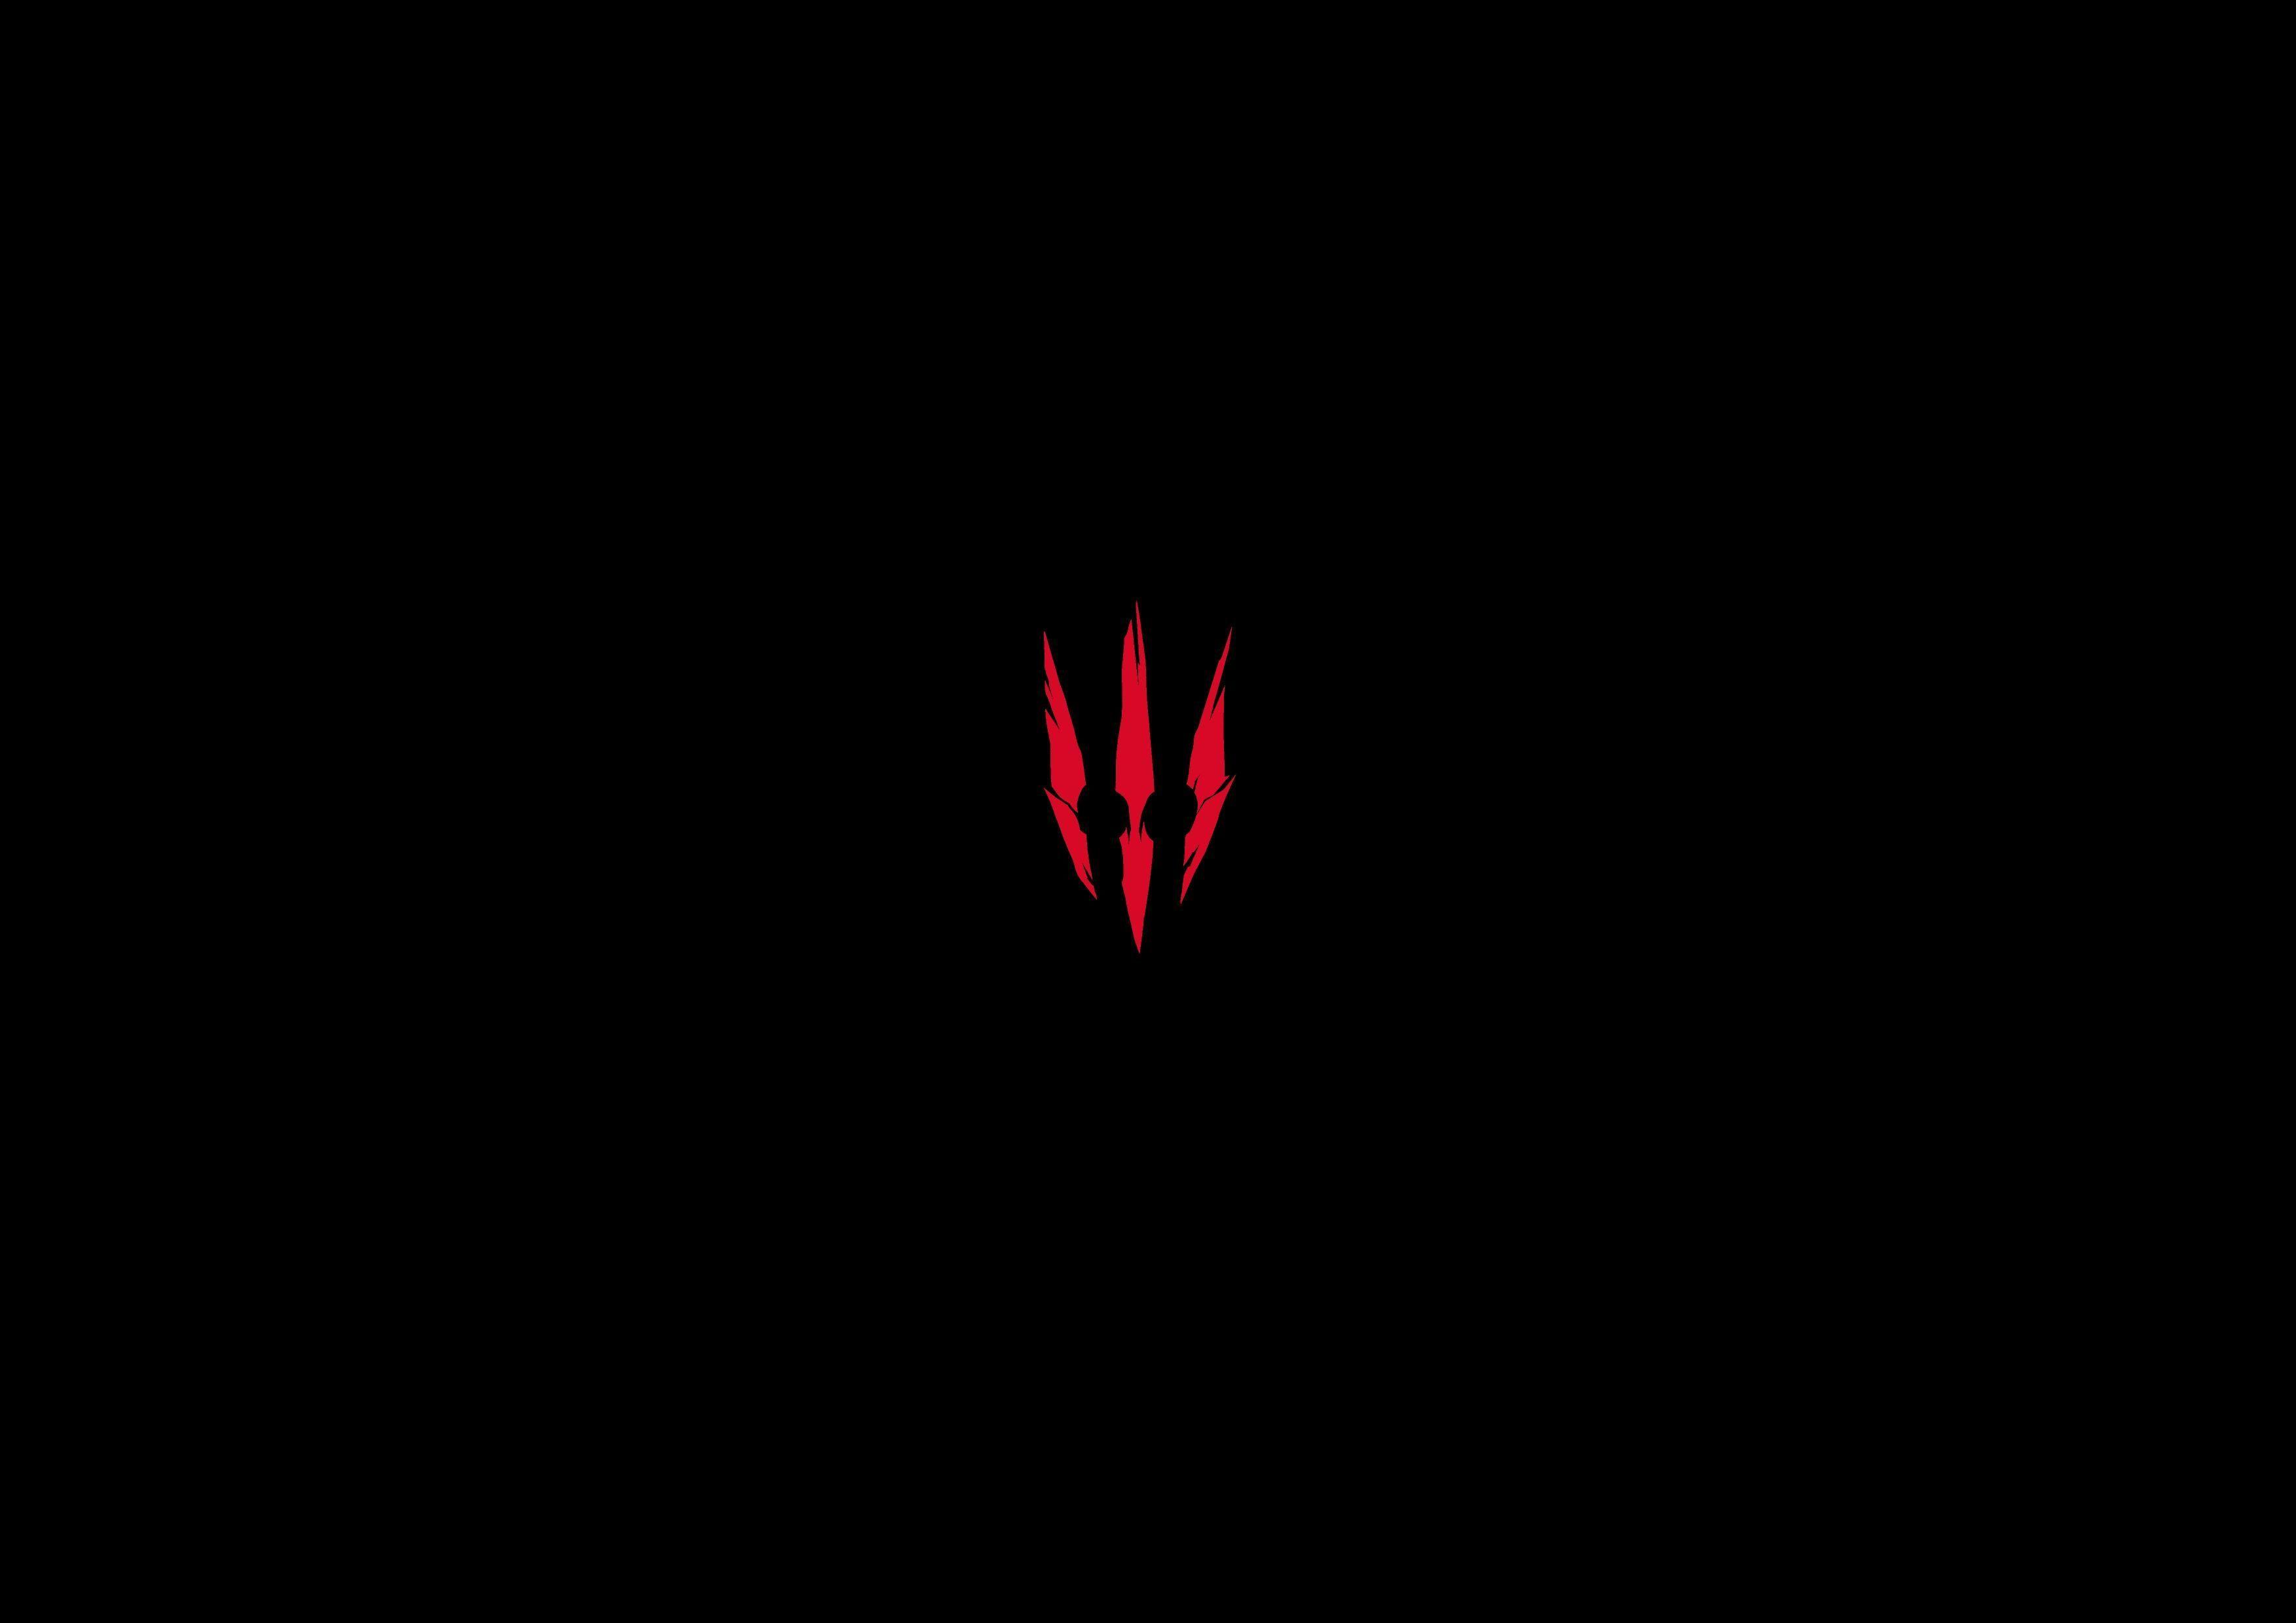 Witcher Logo - The witcher 3 logo wallpaper | Witcher | The witcher 3, The Witcher ...